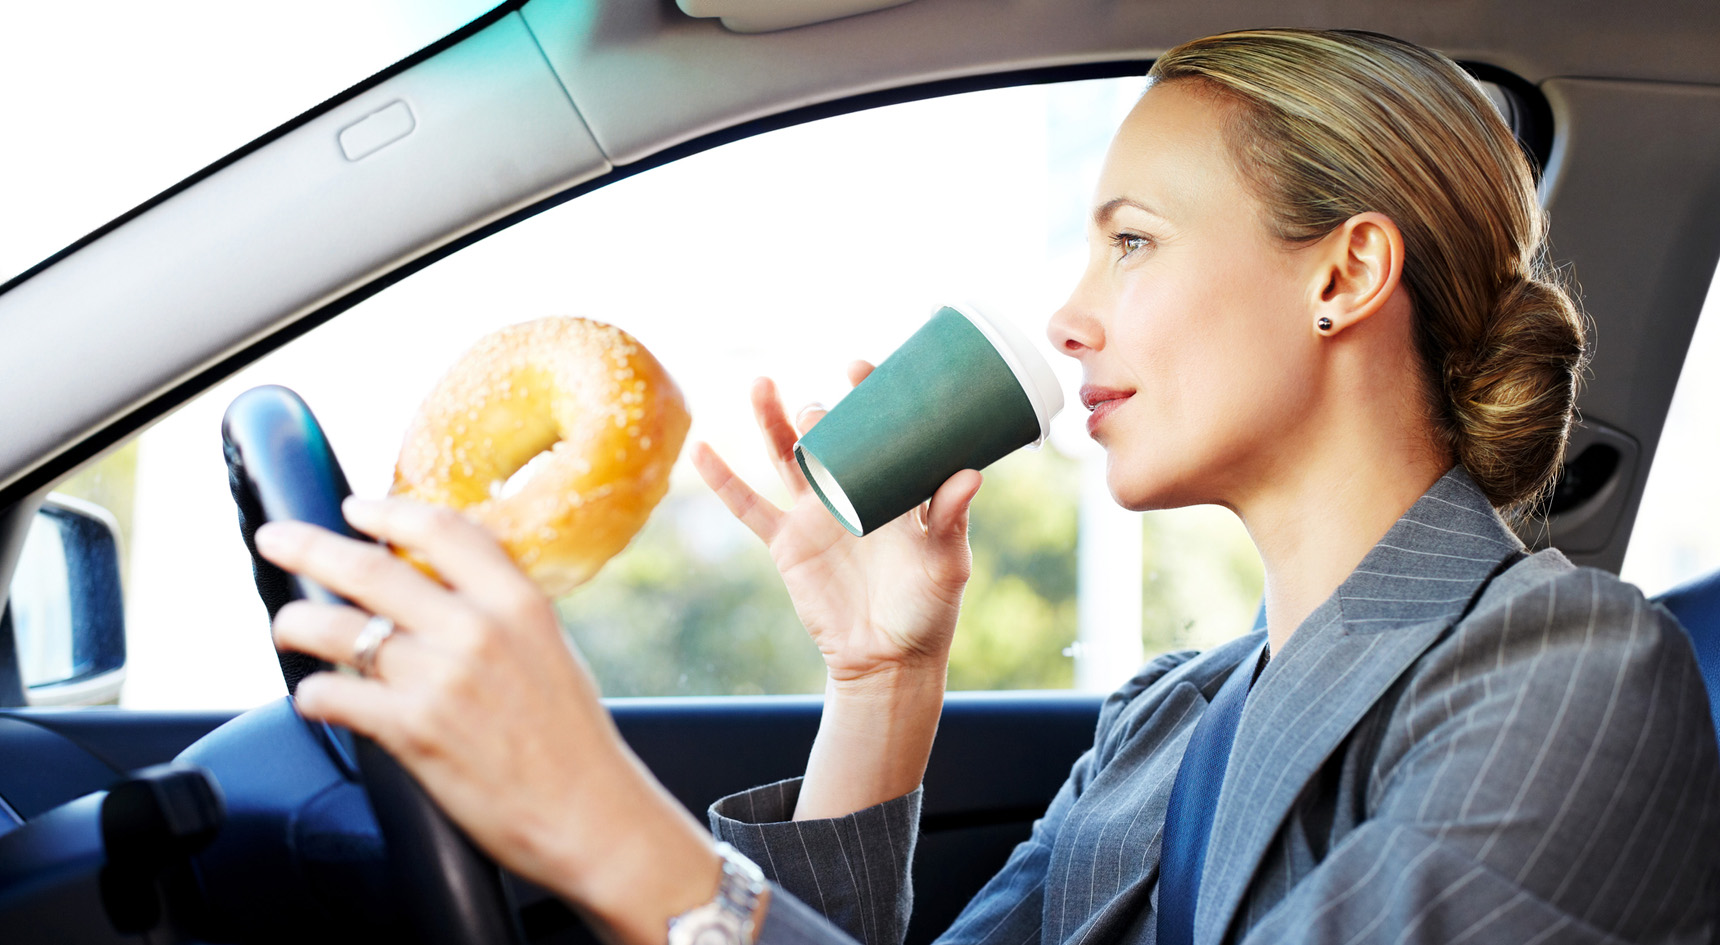 Woman eating and drinking while driving. Image: Getty.